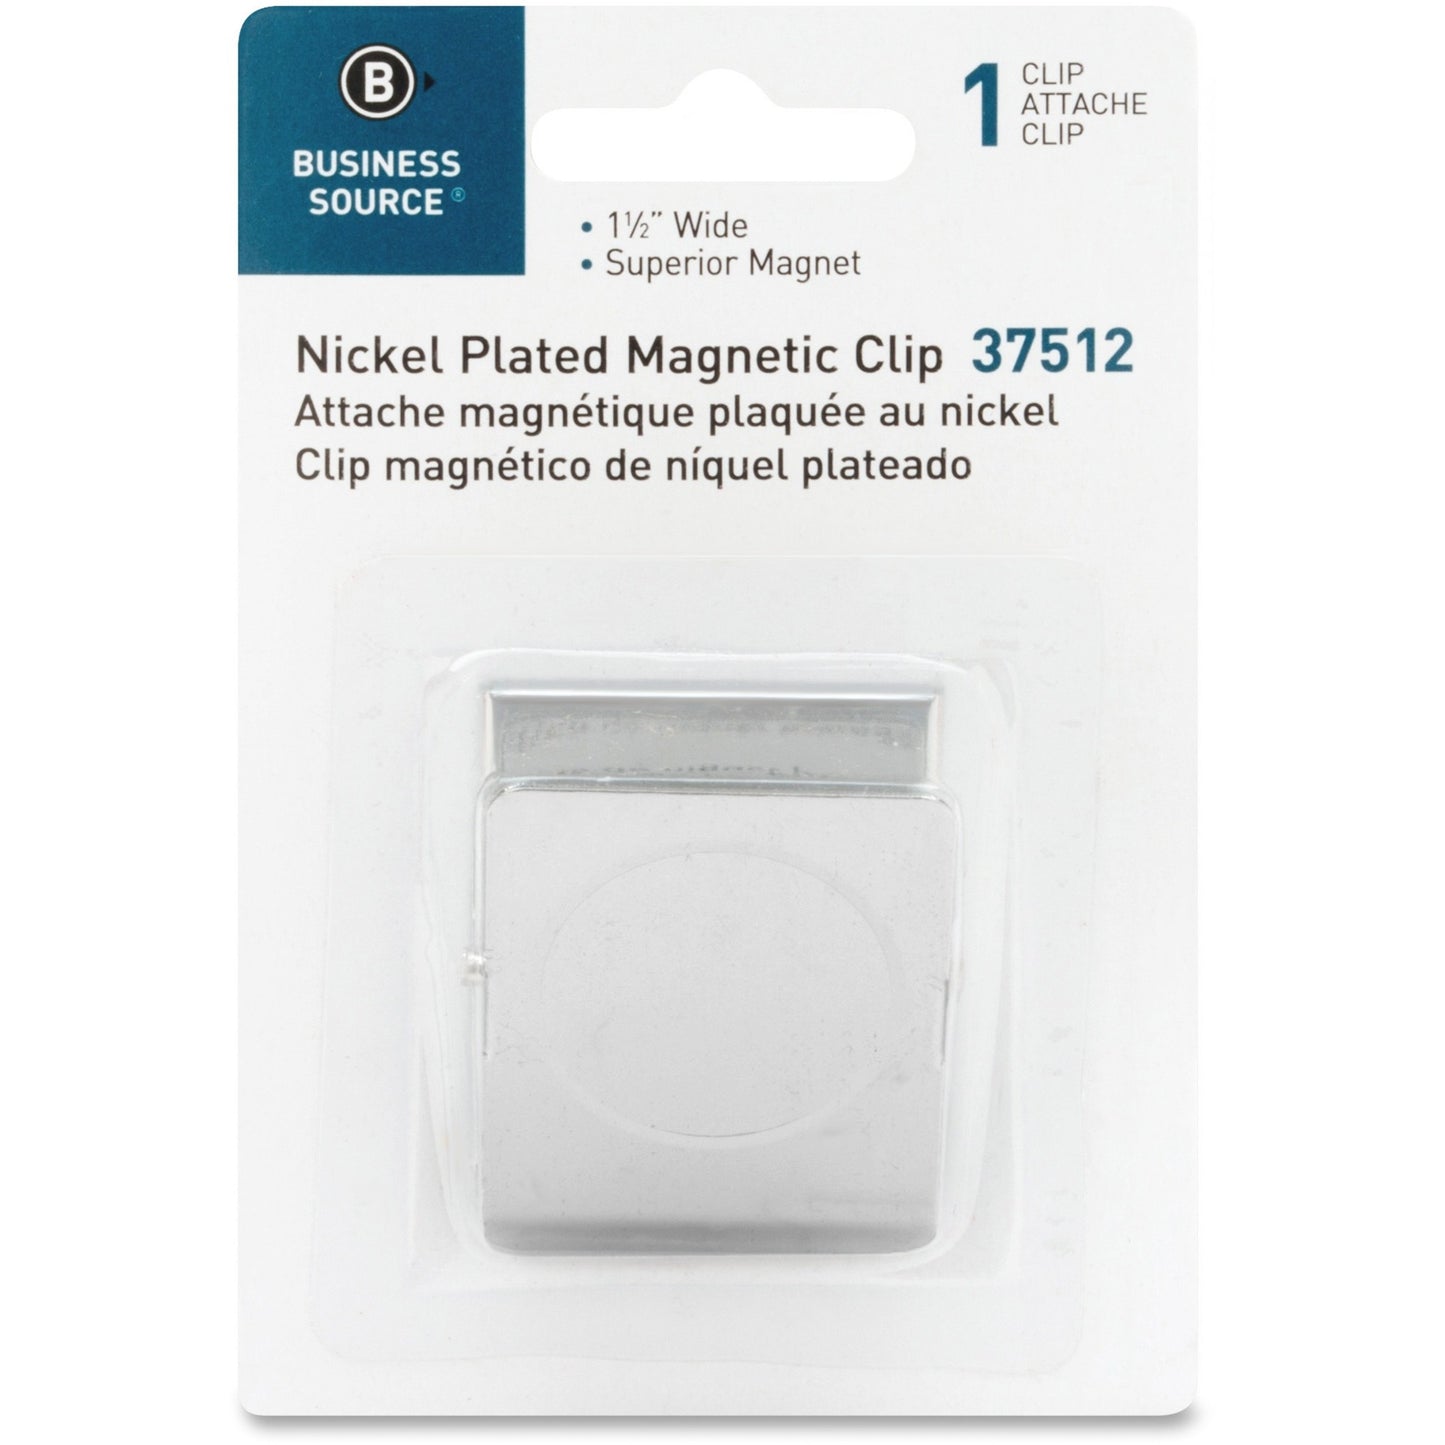 Business Source Nickel Plated Magnetic Clips